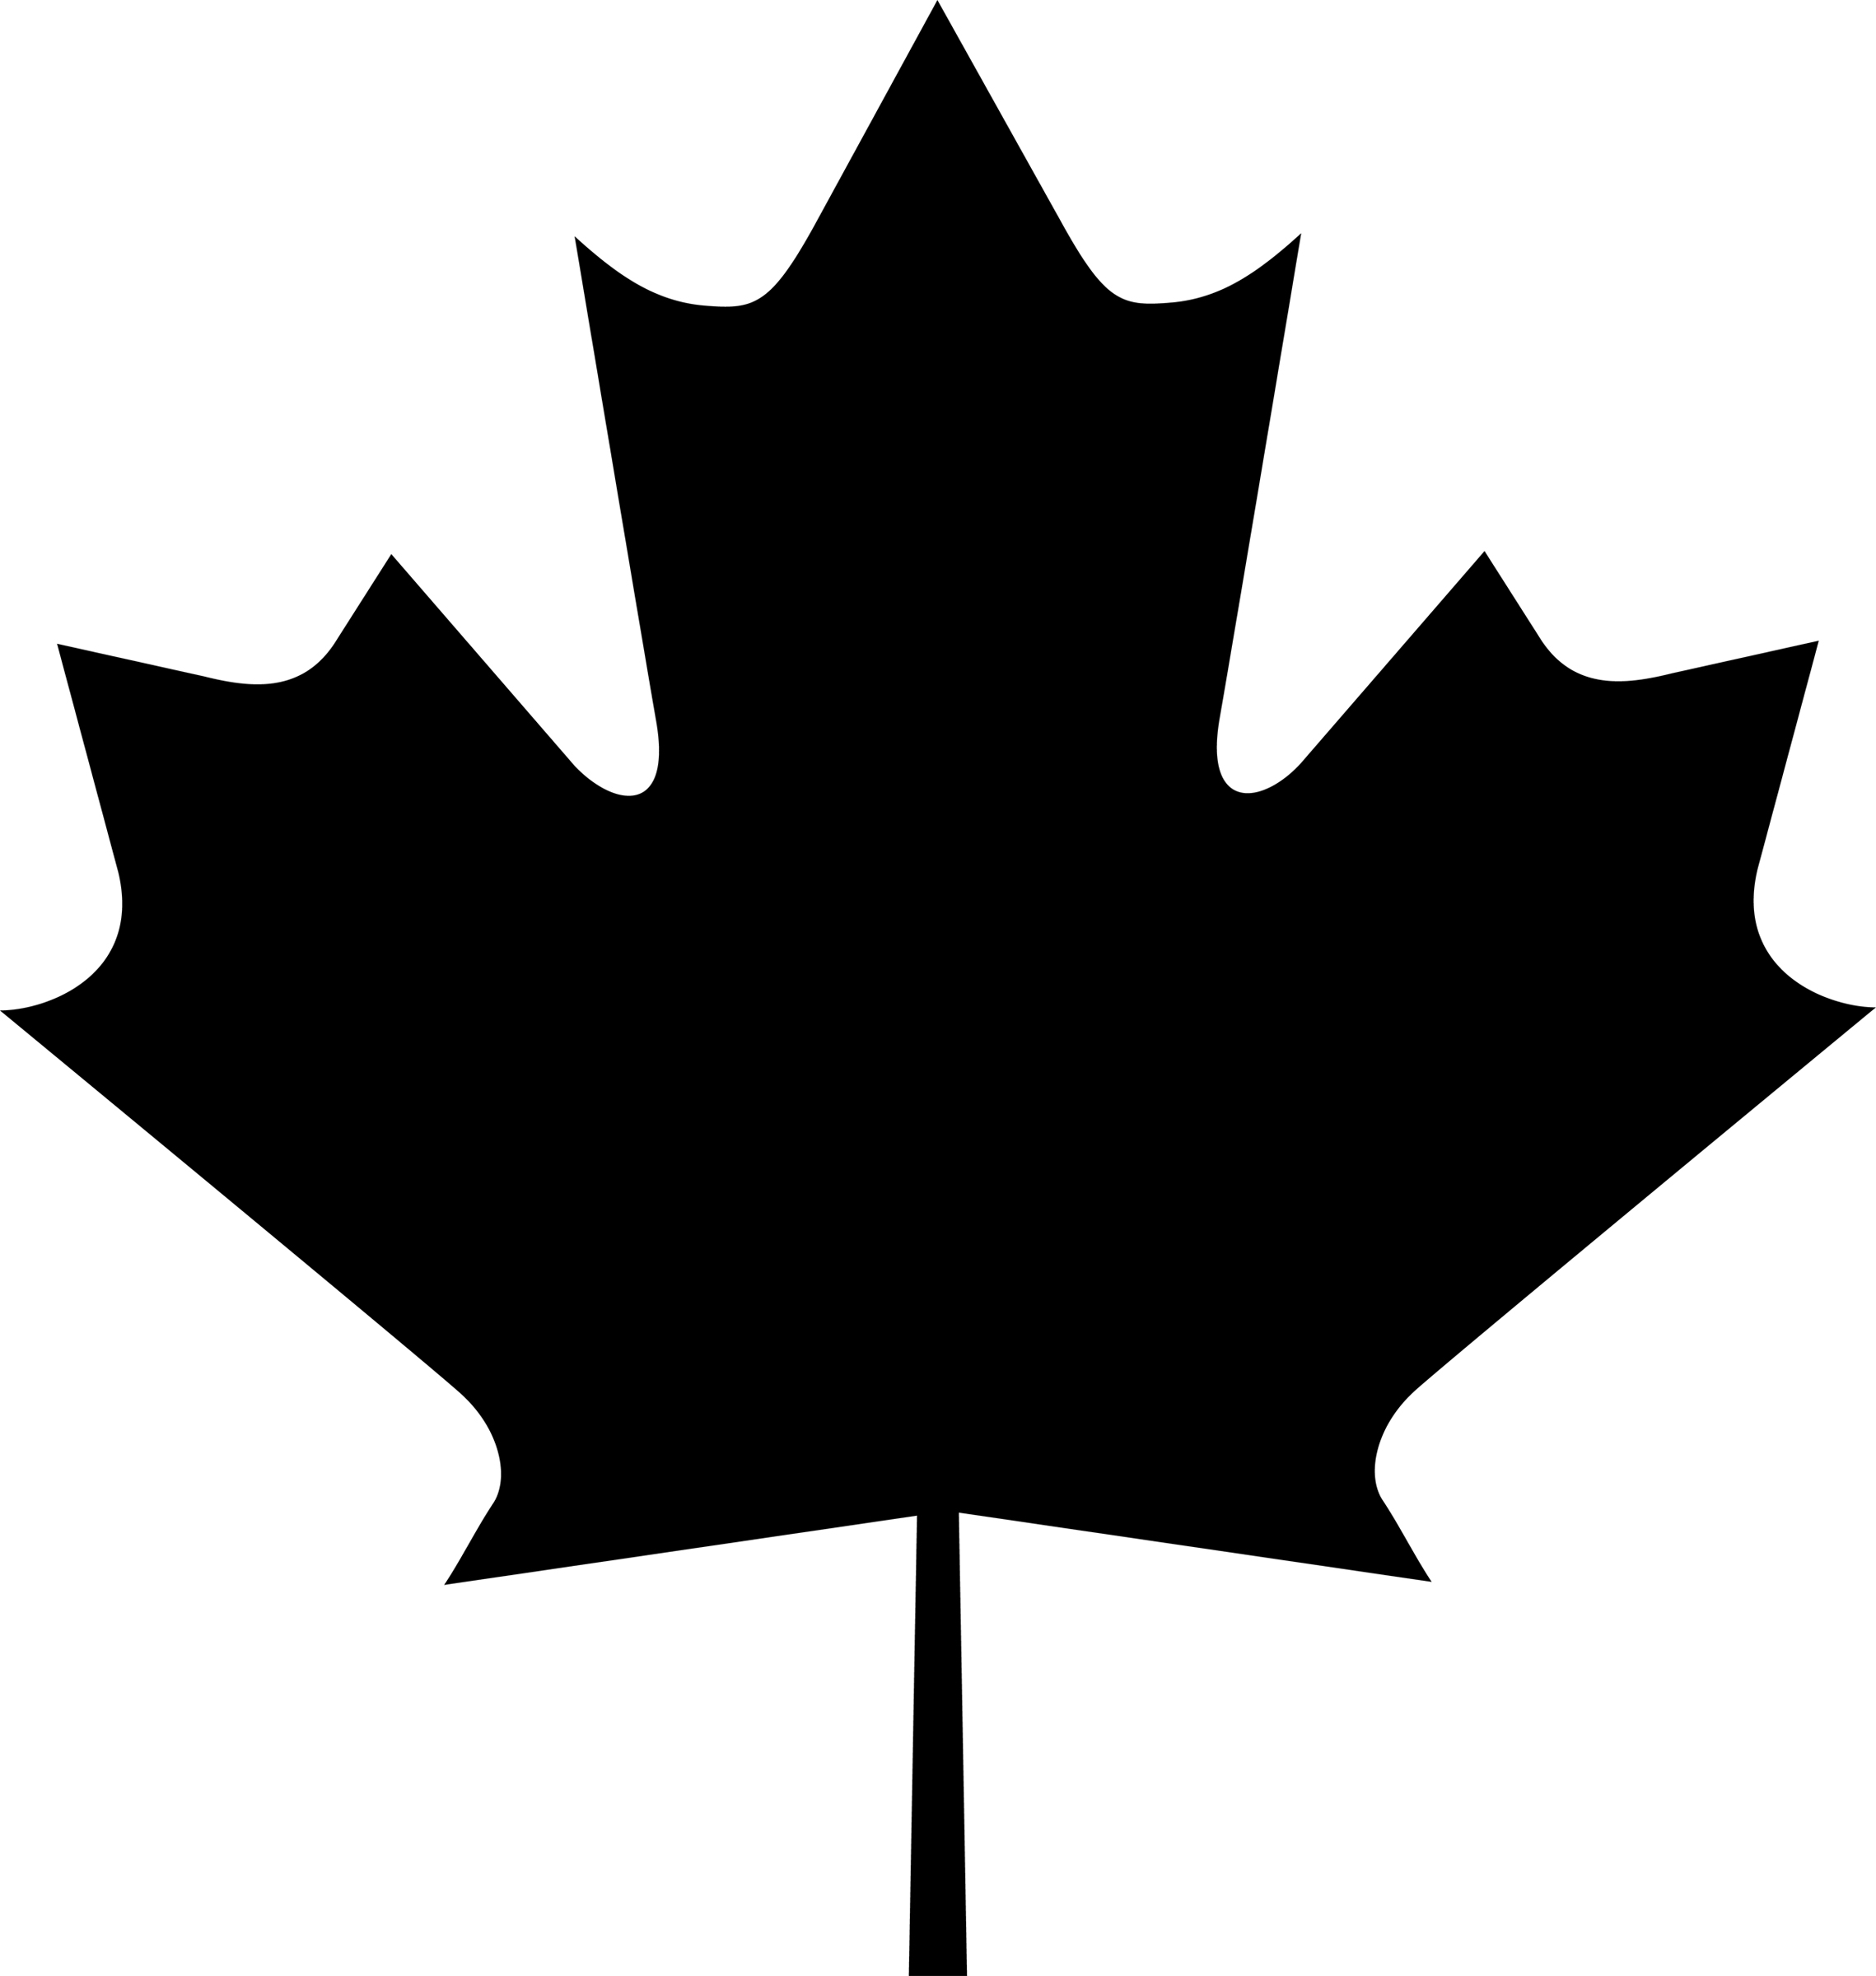 Clipart maple leaf canada